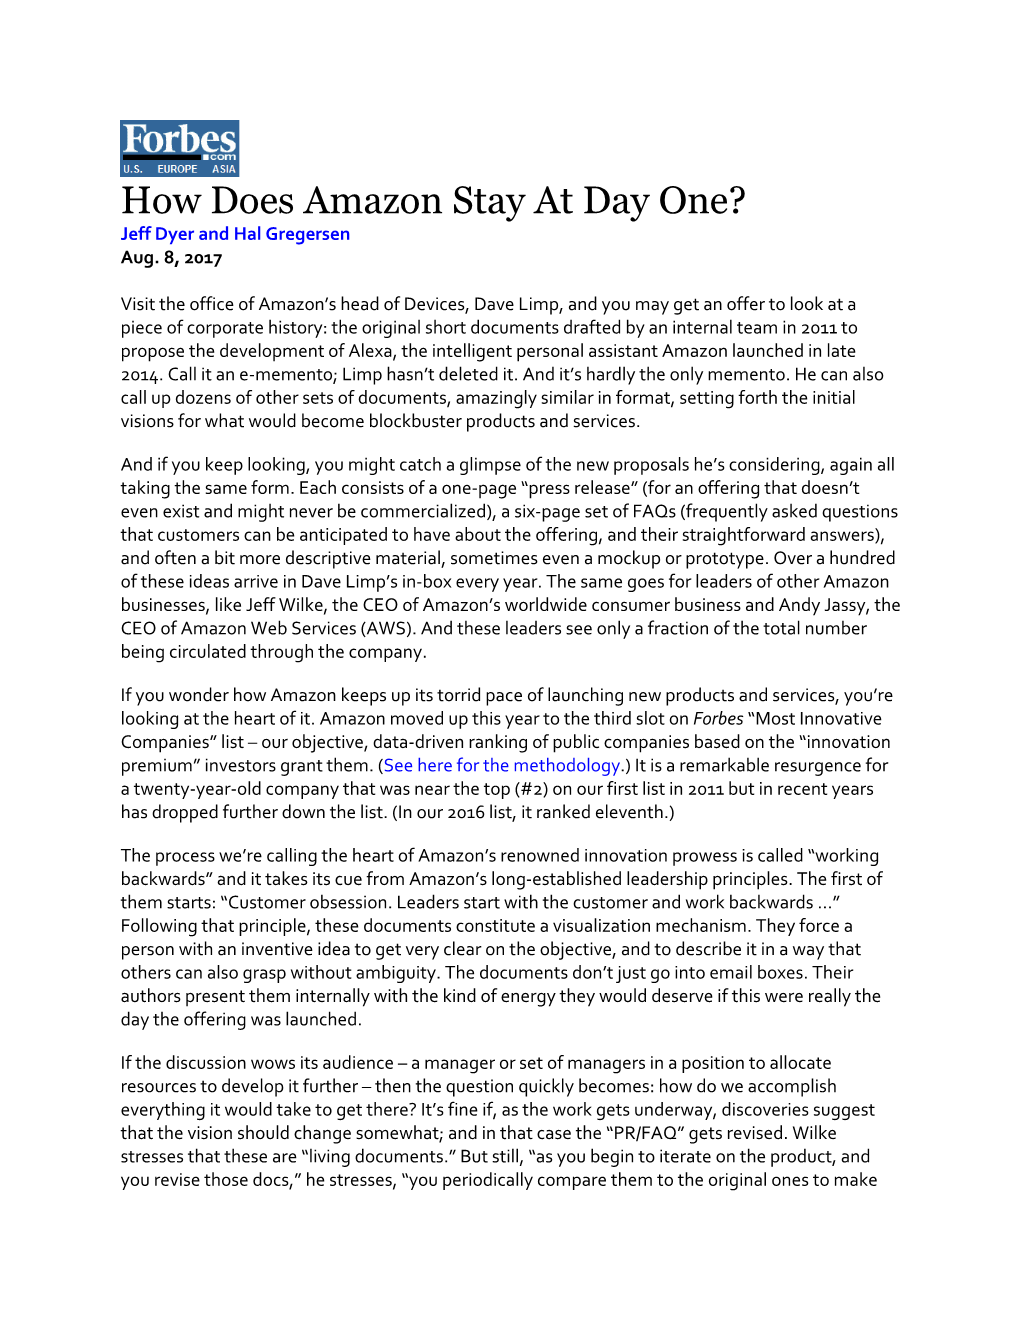 How Does Amazon Stay at Day One? Jeff Dyer and Hal Gregersen Aug